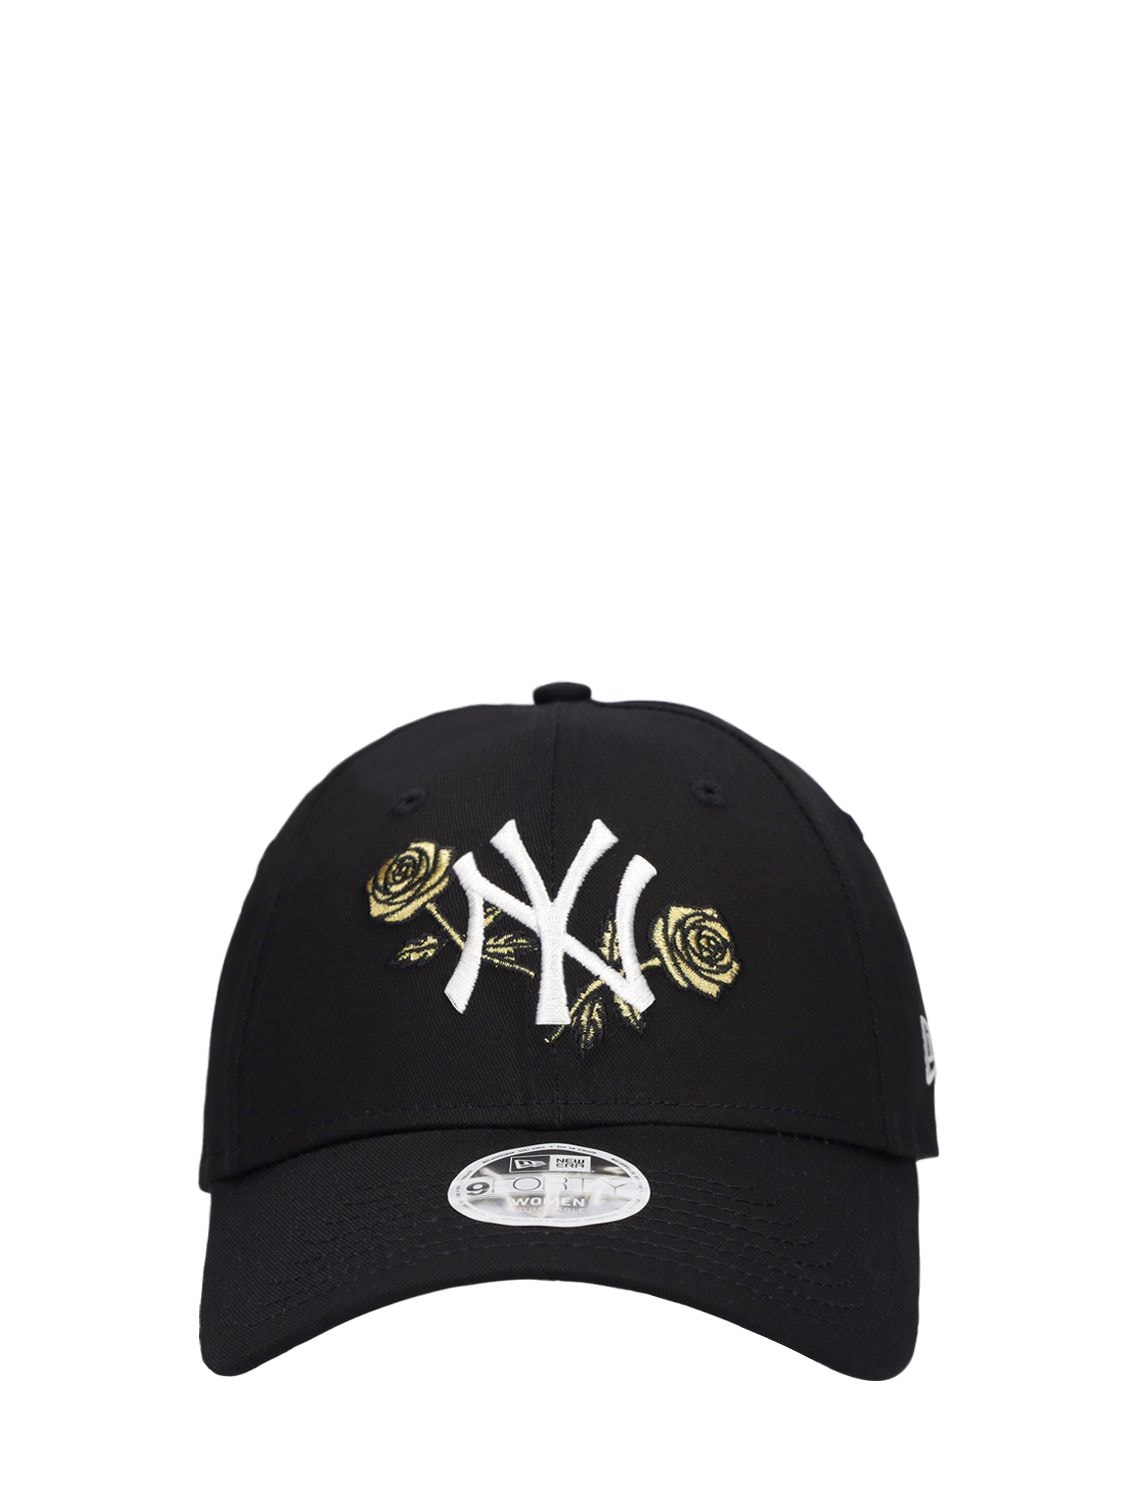 New Era Ny Floral Metallic Embroidery 9forty Cap In Black